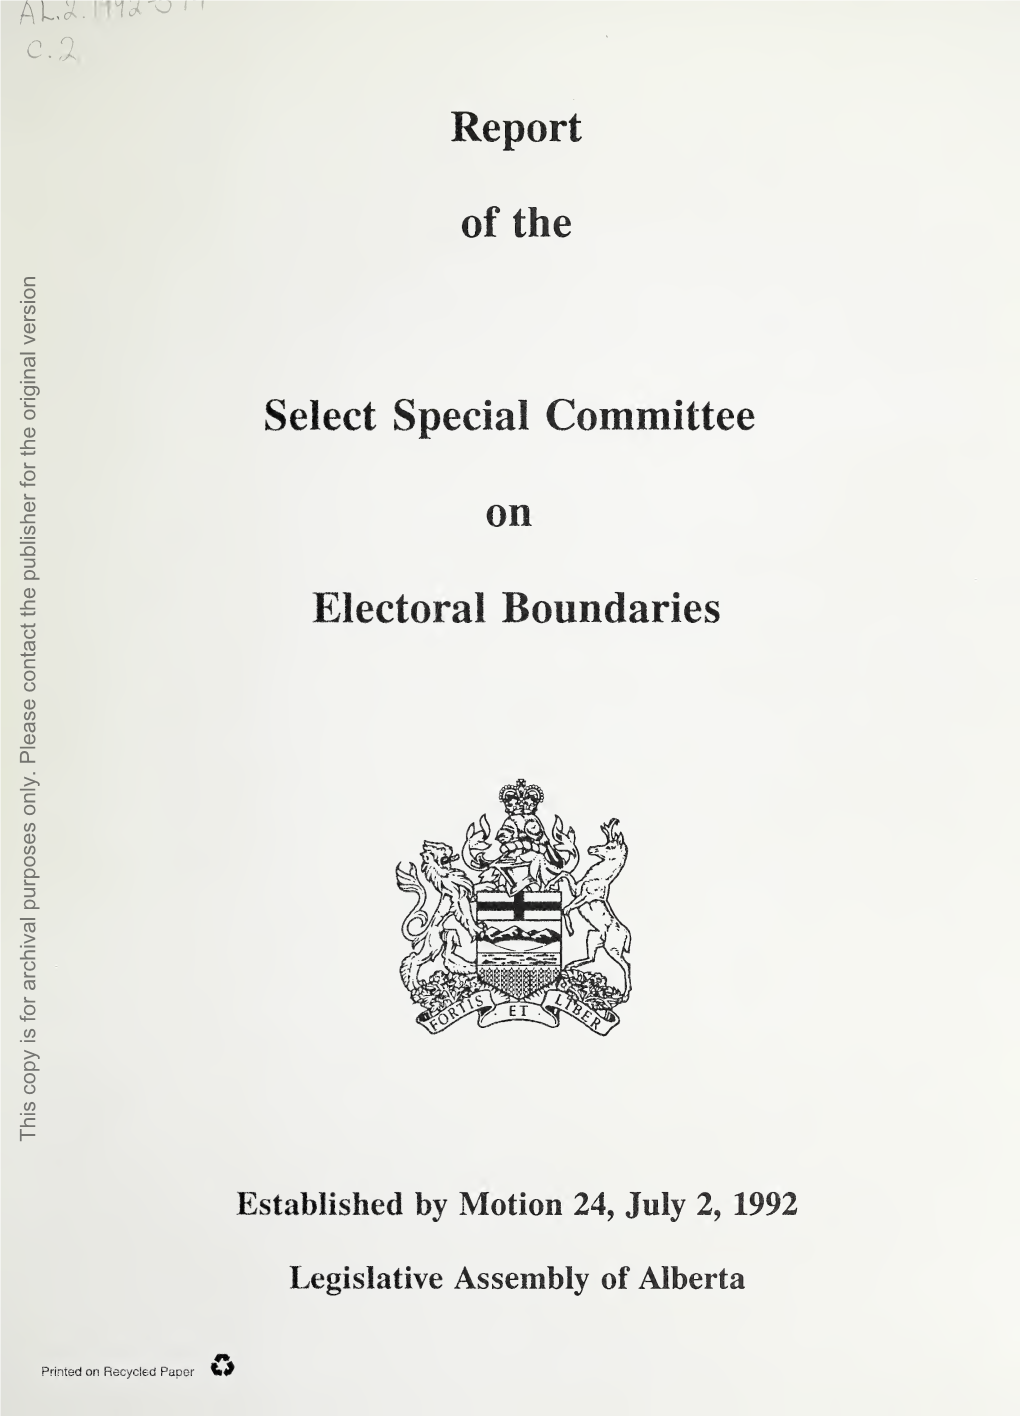 Report of the Select Special Committee on Electoral Boundaries